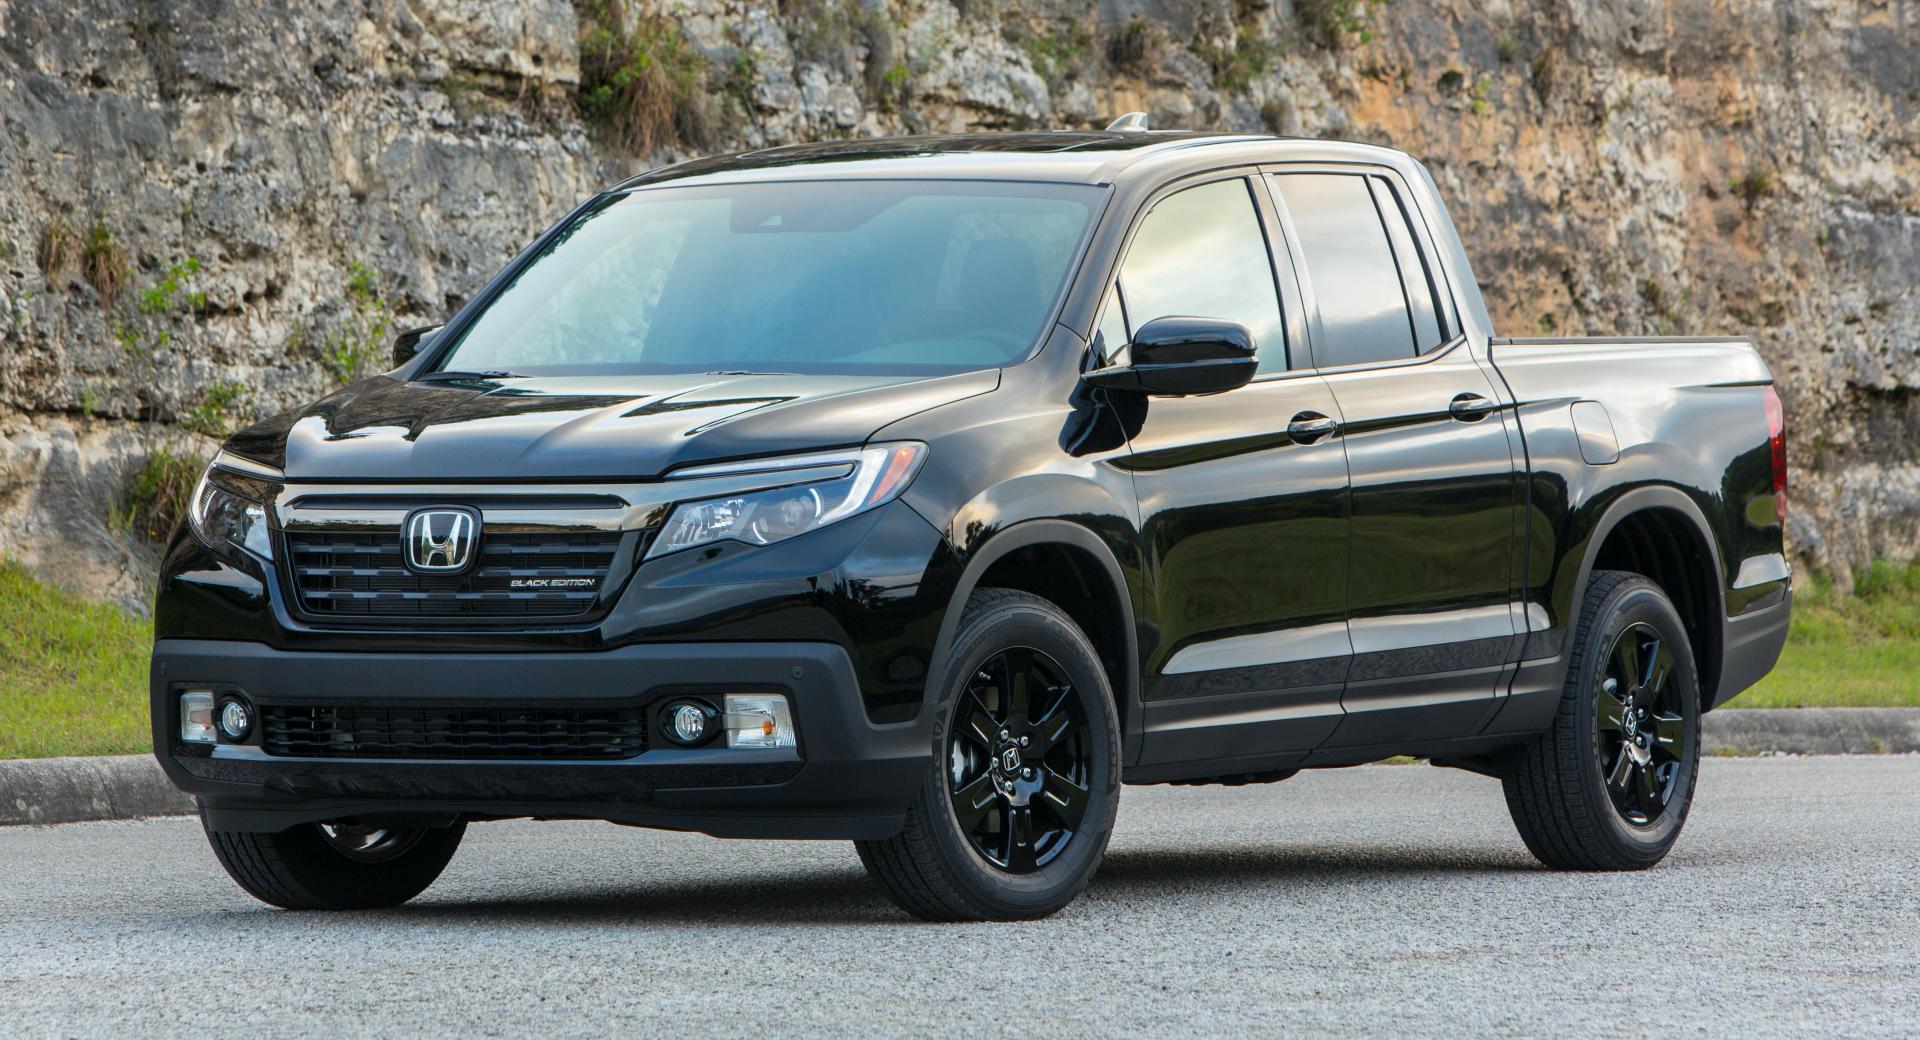 2020 Honda Ridgeline Gains Standard 9-Speed Auto And More Safety Tech,  Starts $4k Higher | Carscoops